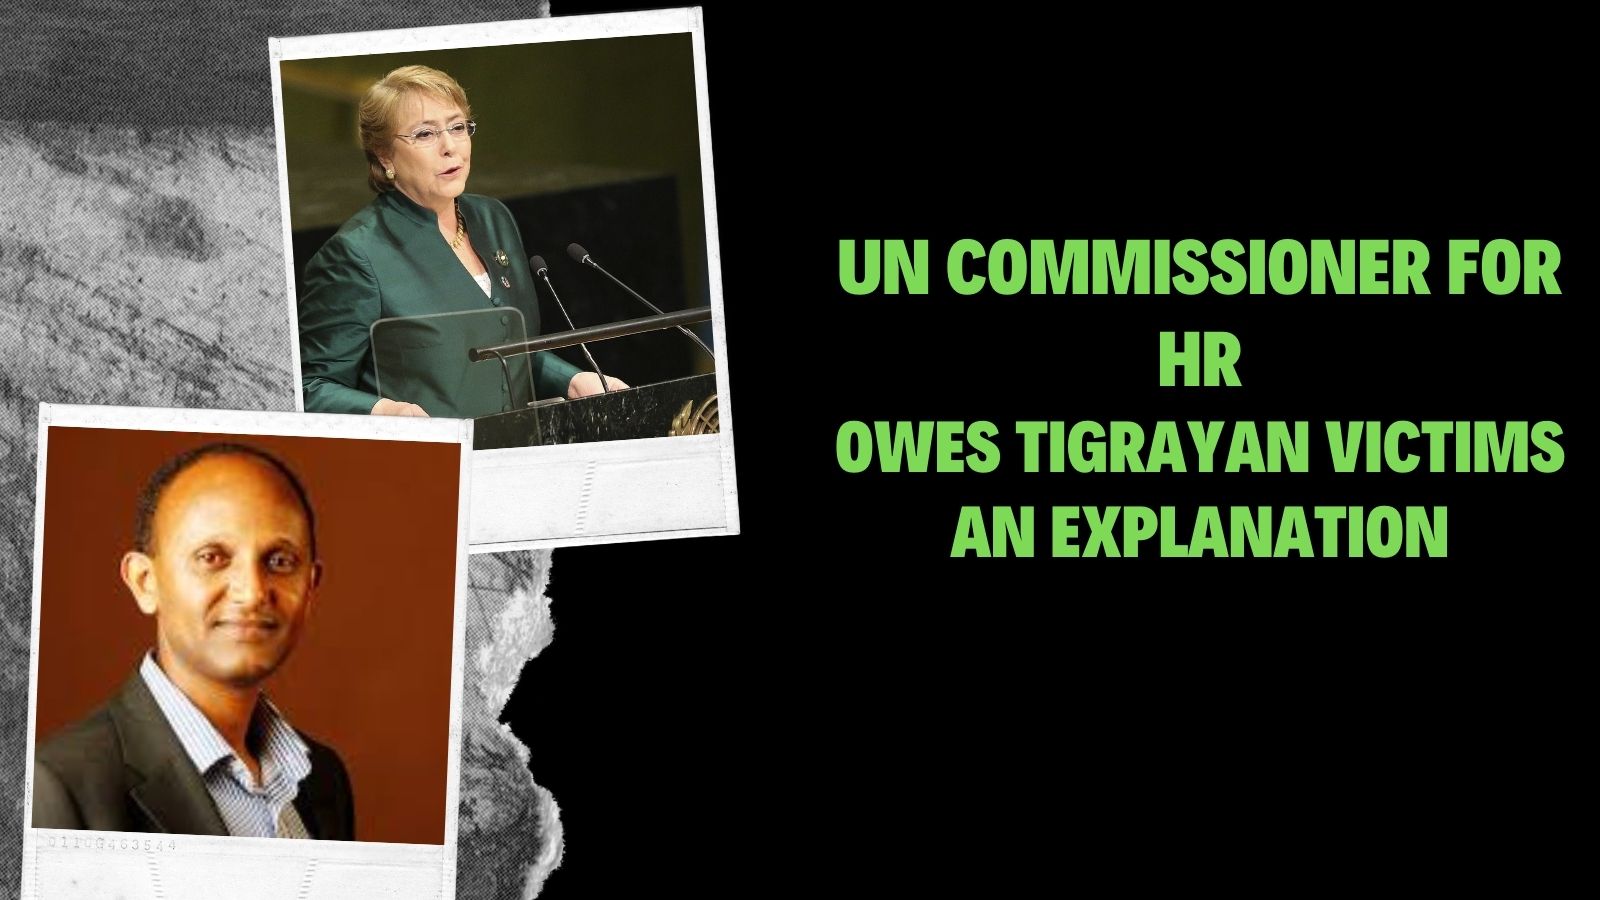 UN Commissioner for Human Rights Owes Tigrayan Victims an Explanation